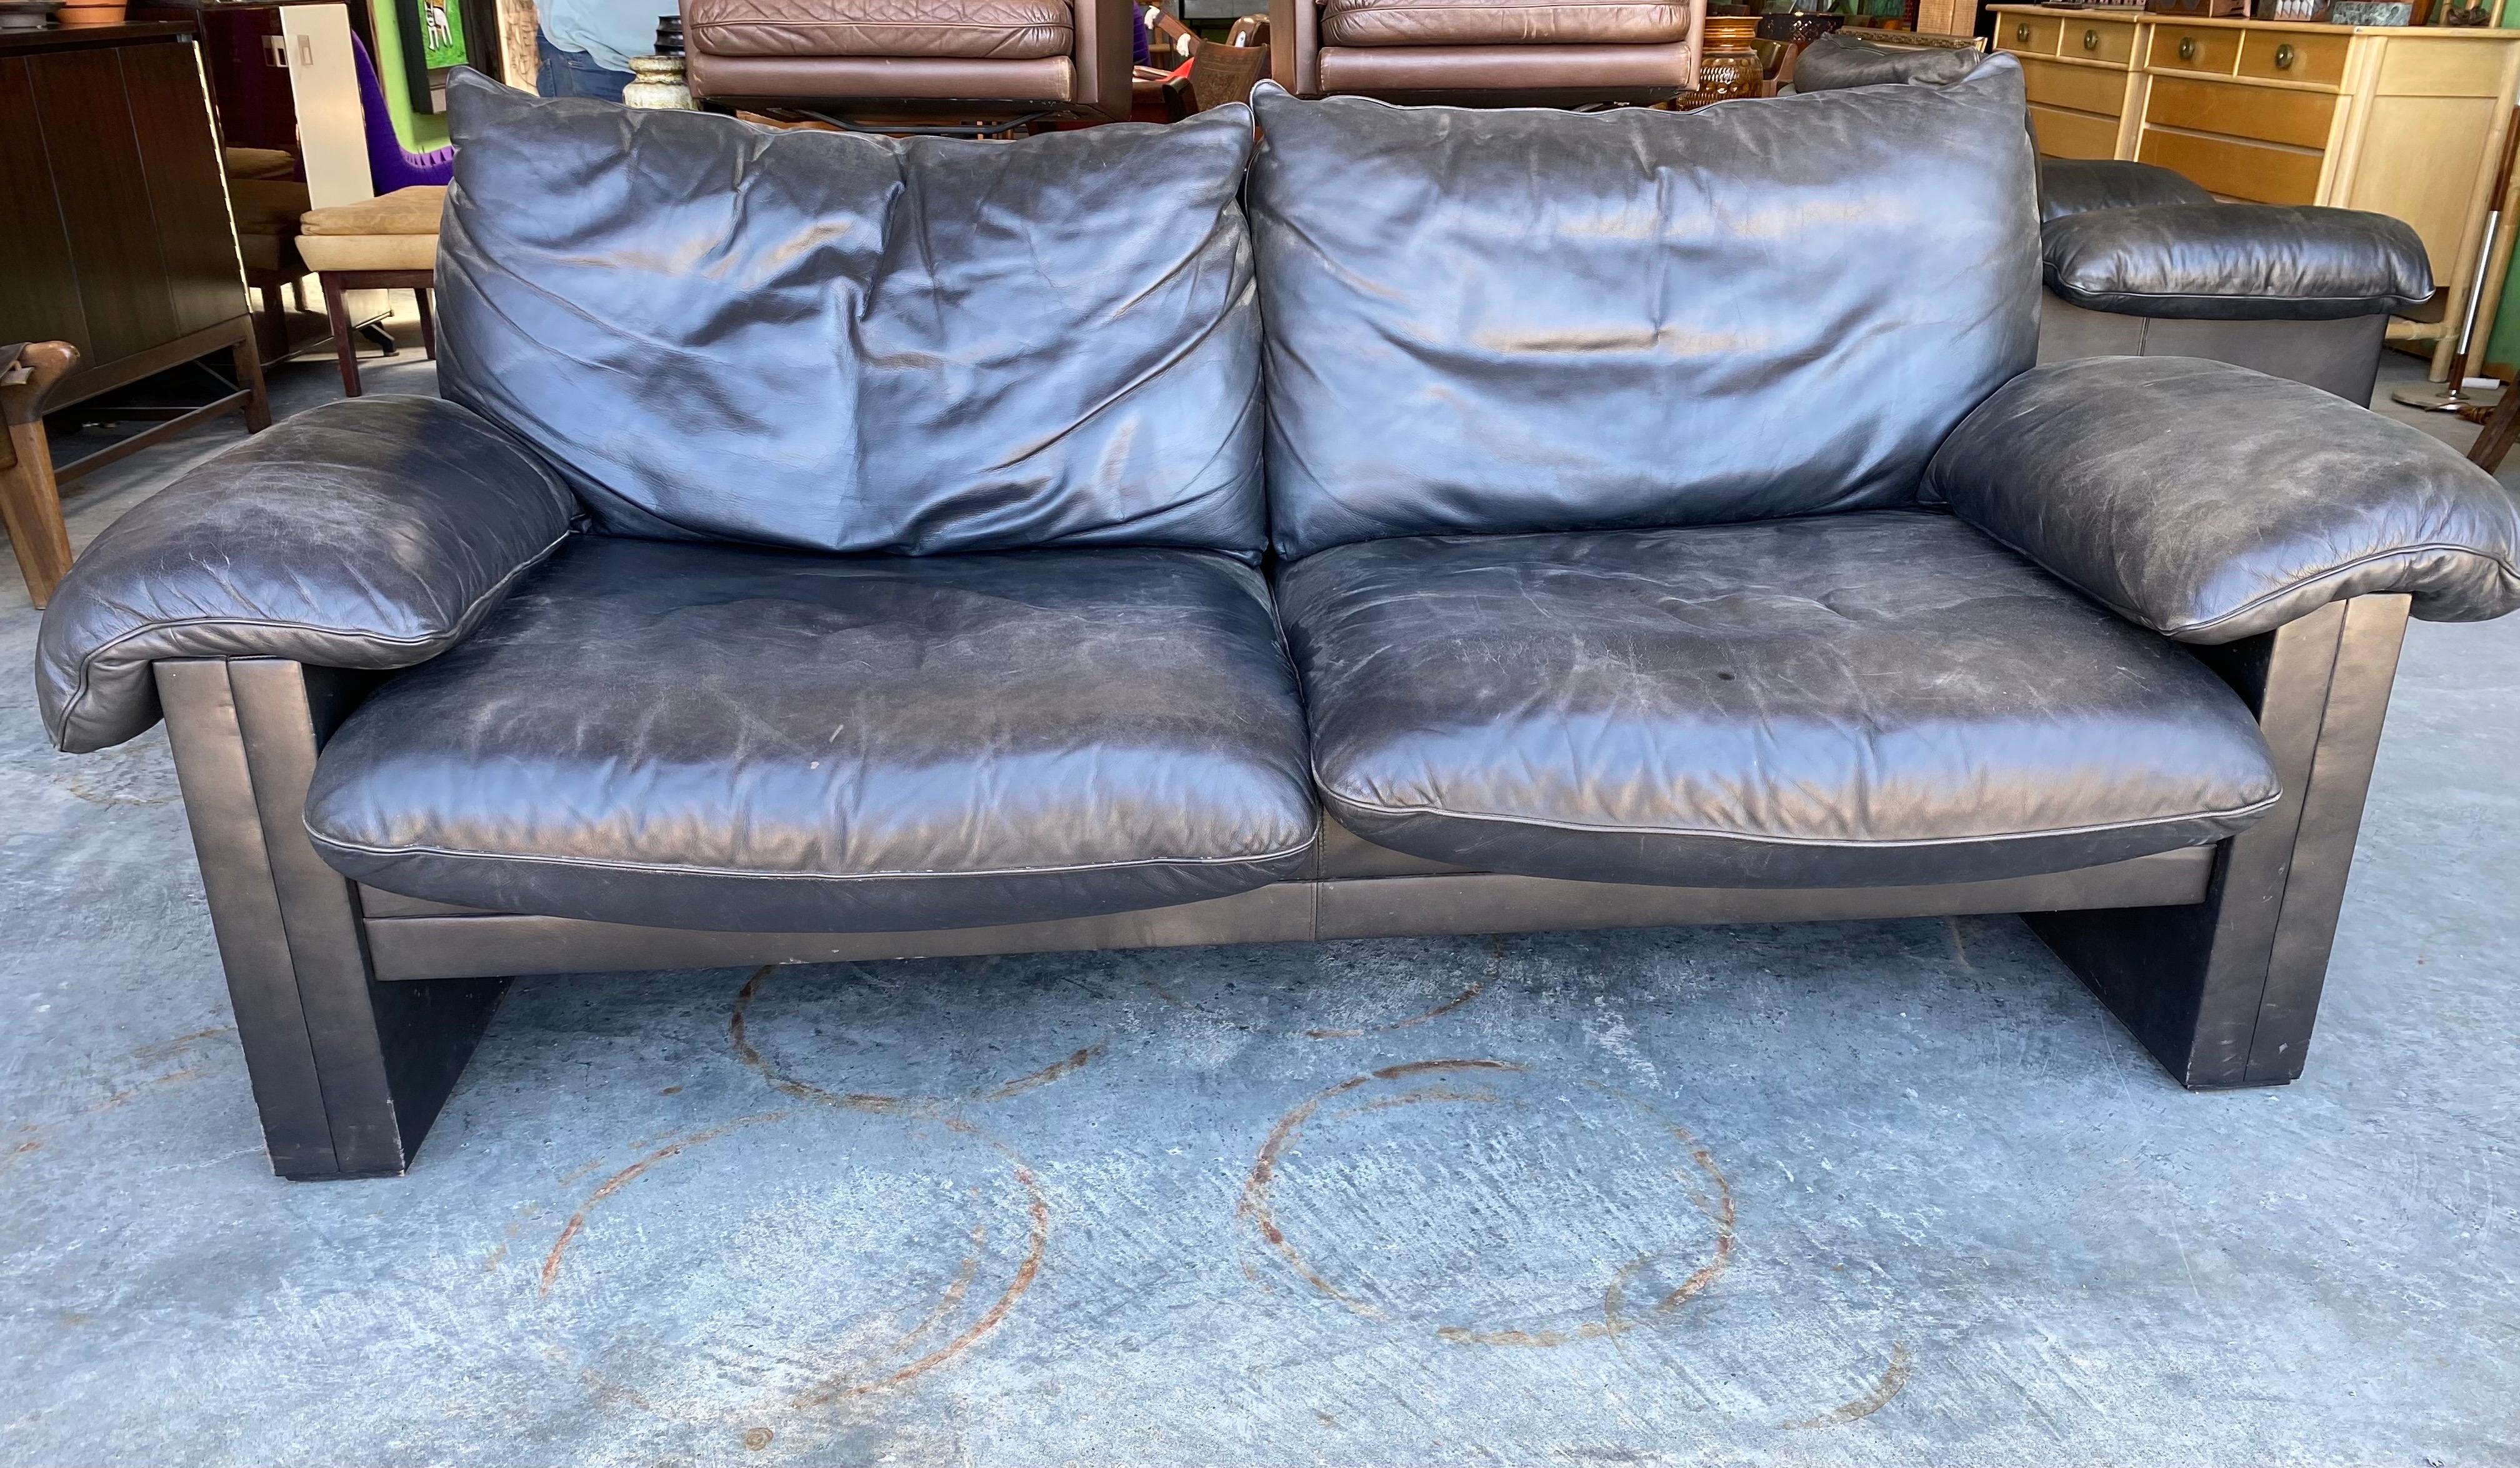 Unique vintage black leather sofa by De Sede DS-73 b, circa 1990s. This De Sede sofa has a nice patina giving it the desired look of aged premium leather. Made in Switzerland, De Sede is renowned for its high-quality leather and supreme